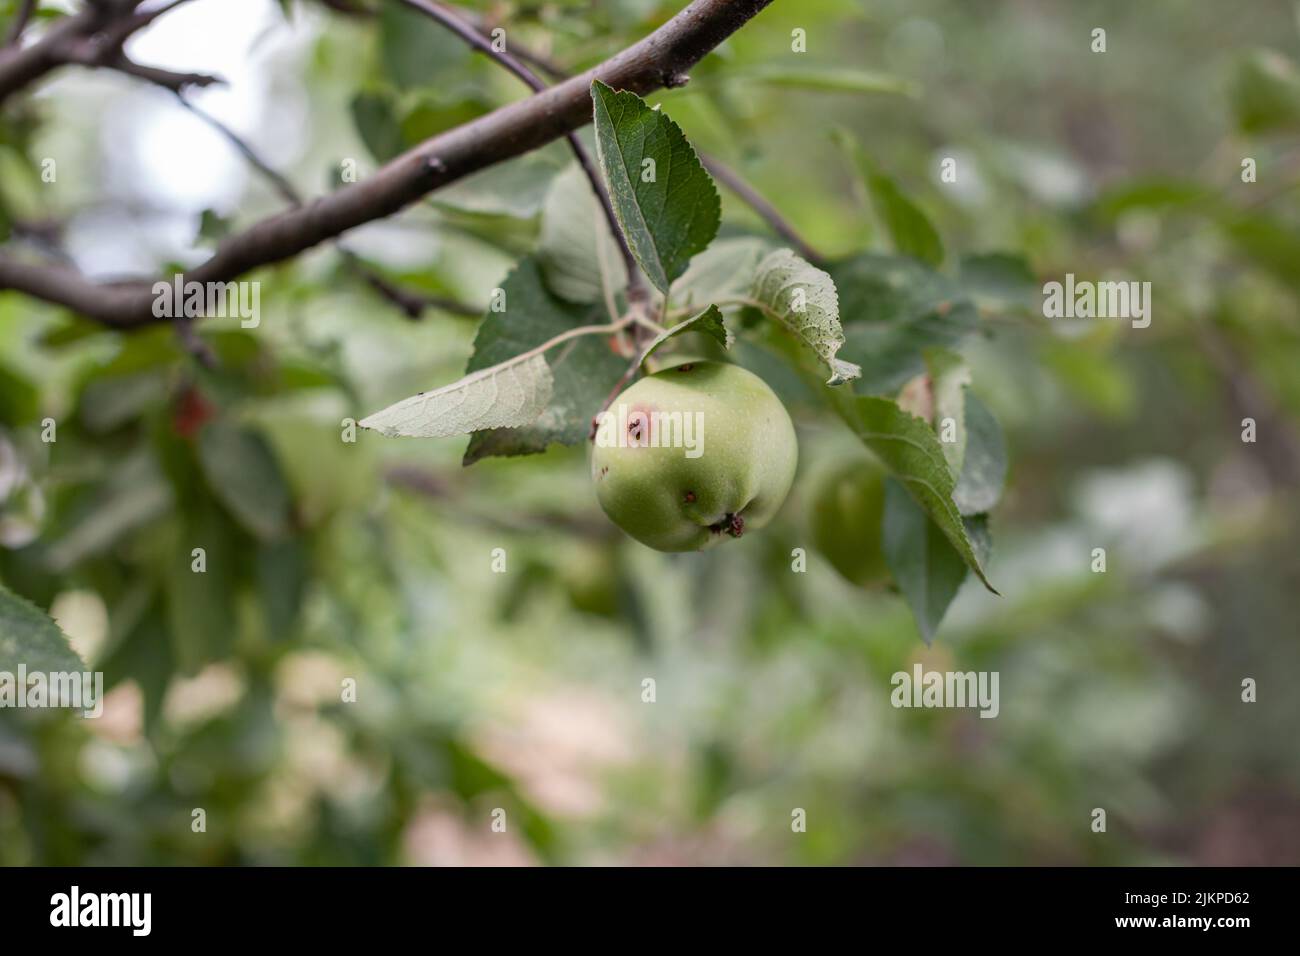 A green worm-eaten apple weighs on a tree branch in the garden. An apple affected by the disease, on a branch of an apple tree in the garden. A sick s Stock Photo